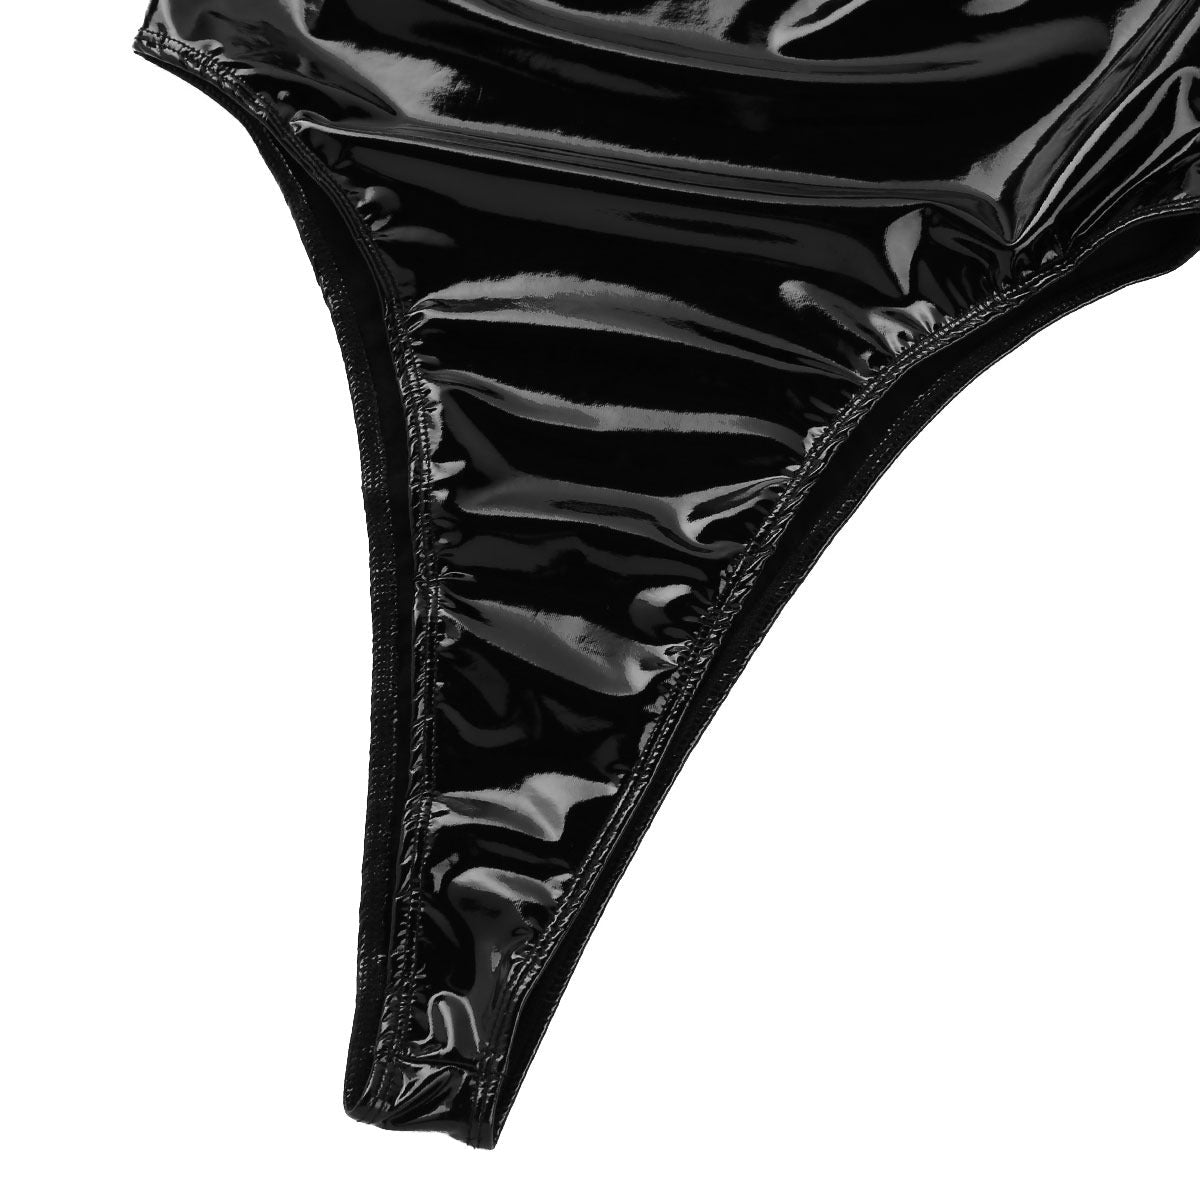 Women's Black Patent Leather Sexy Bodysuit / Adjustable Straps Push-Up High Cut Thong Bodysuits - HARD'N'HEAVY